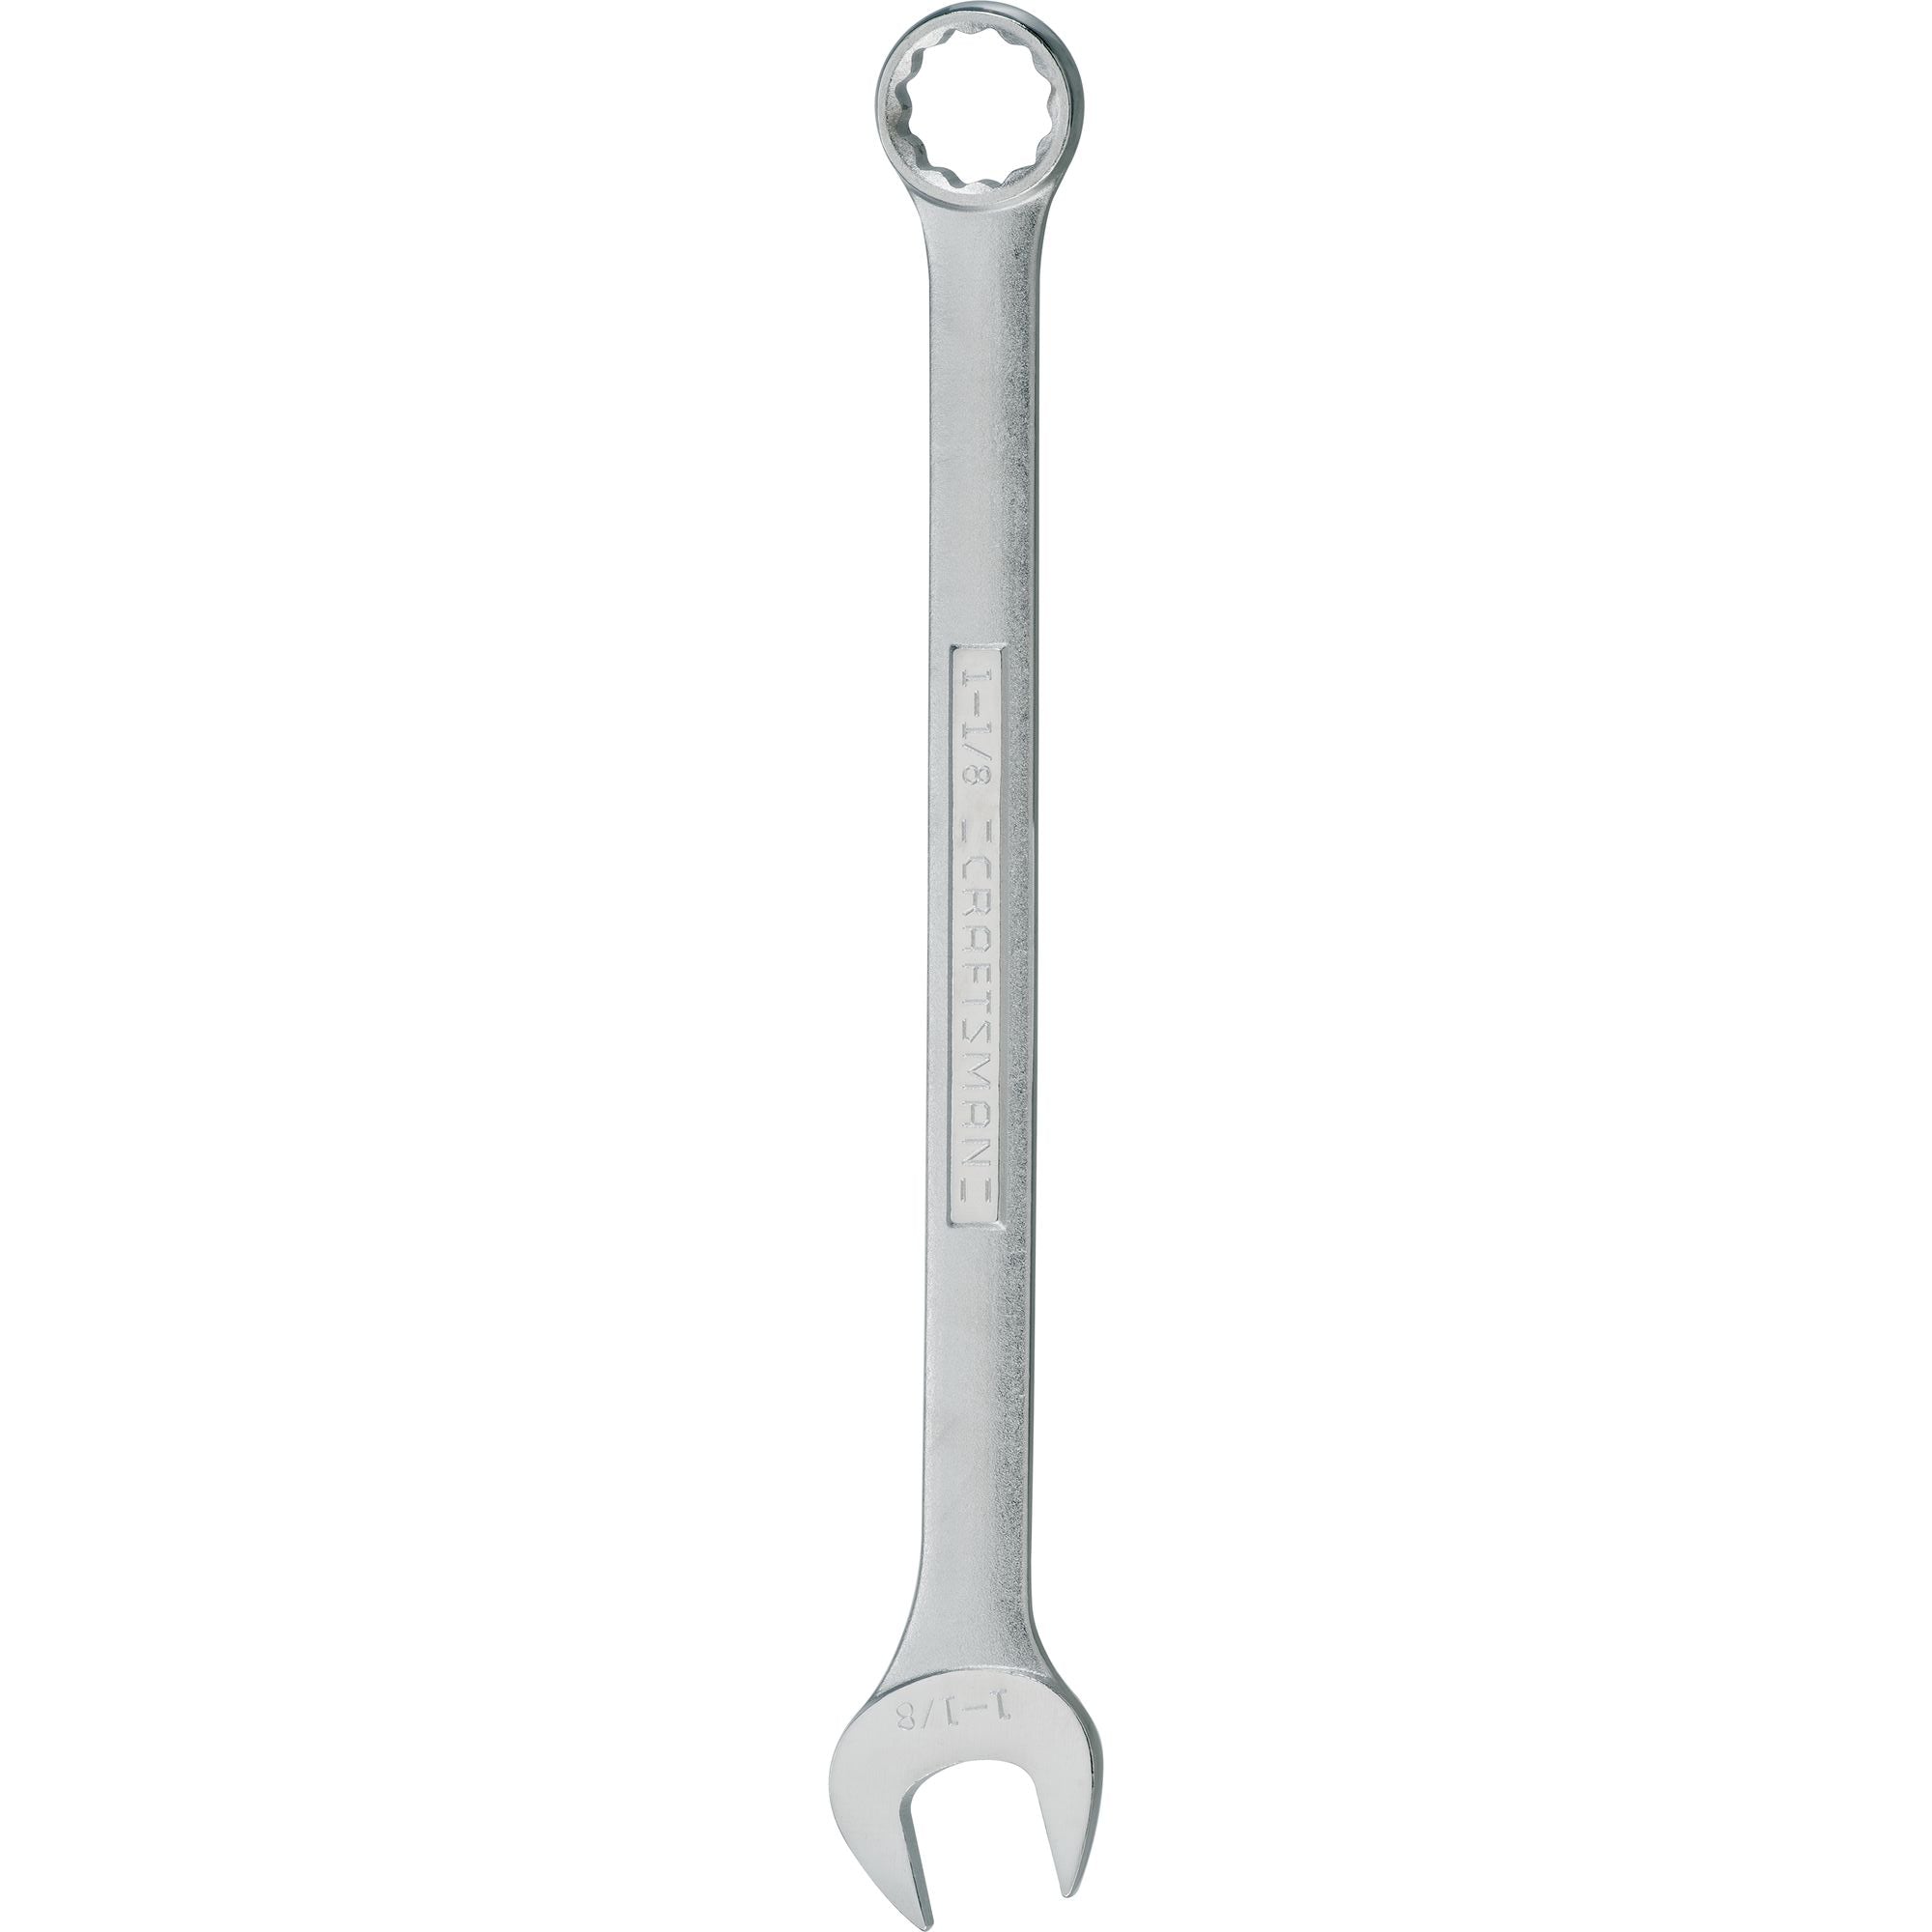 1-1/8-in Standard SAE Combination Wrench | CRAFTSMAN